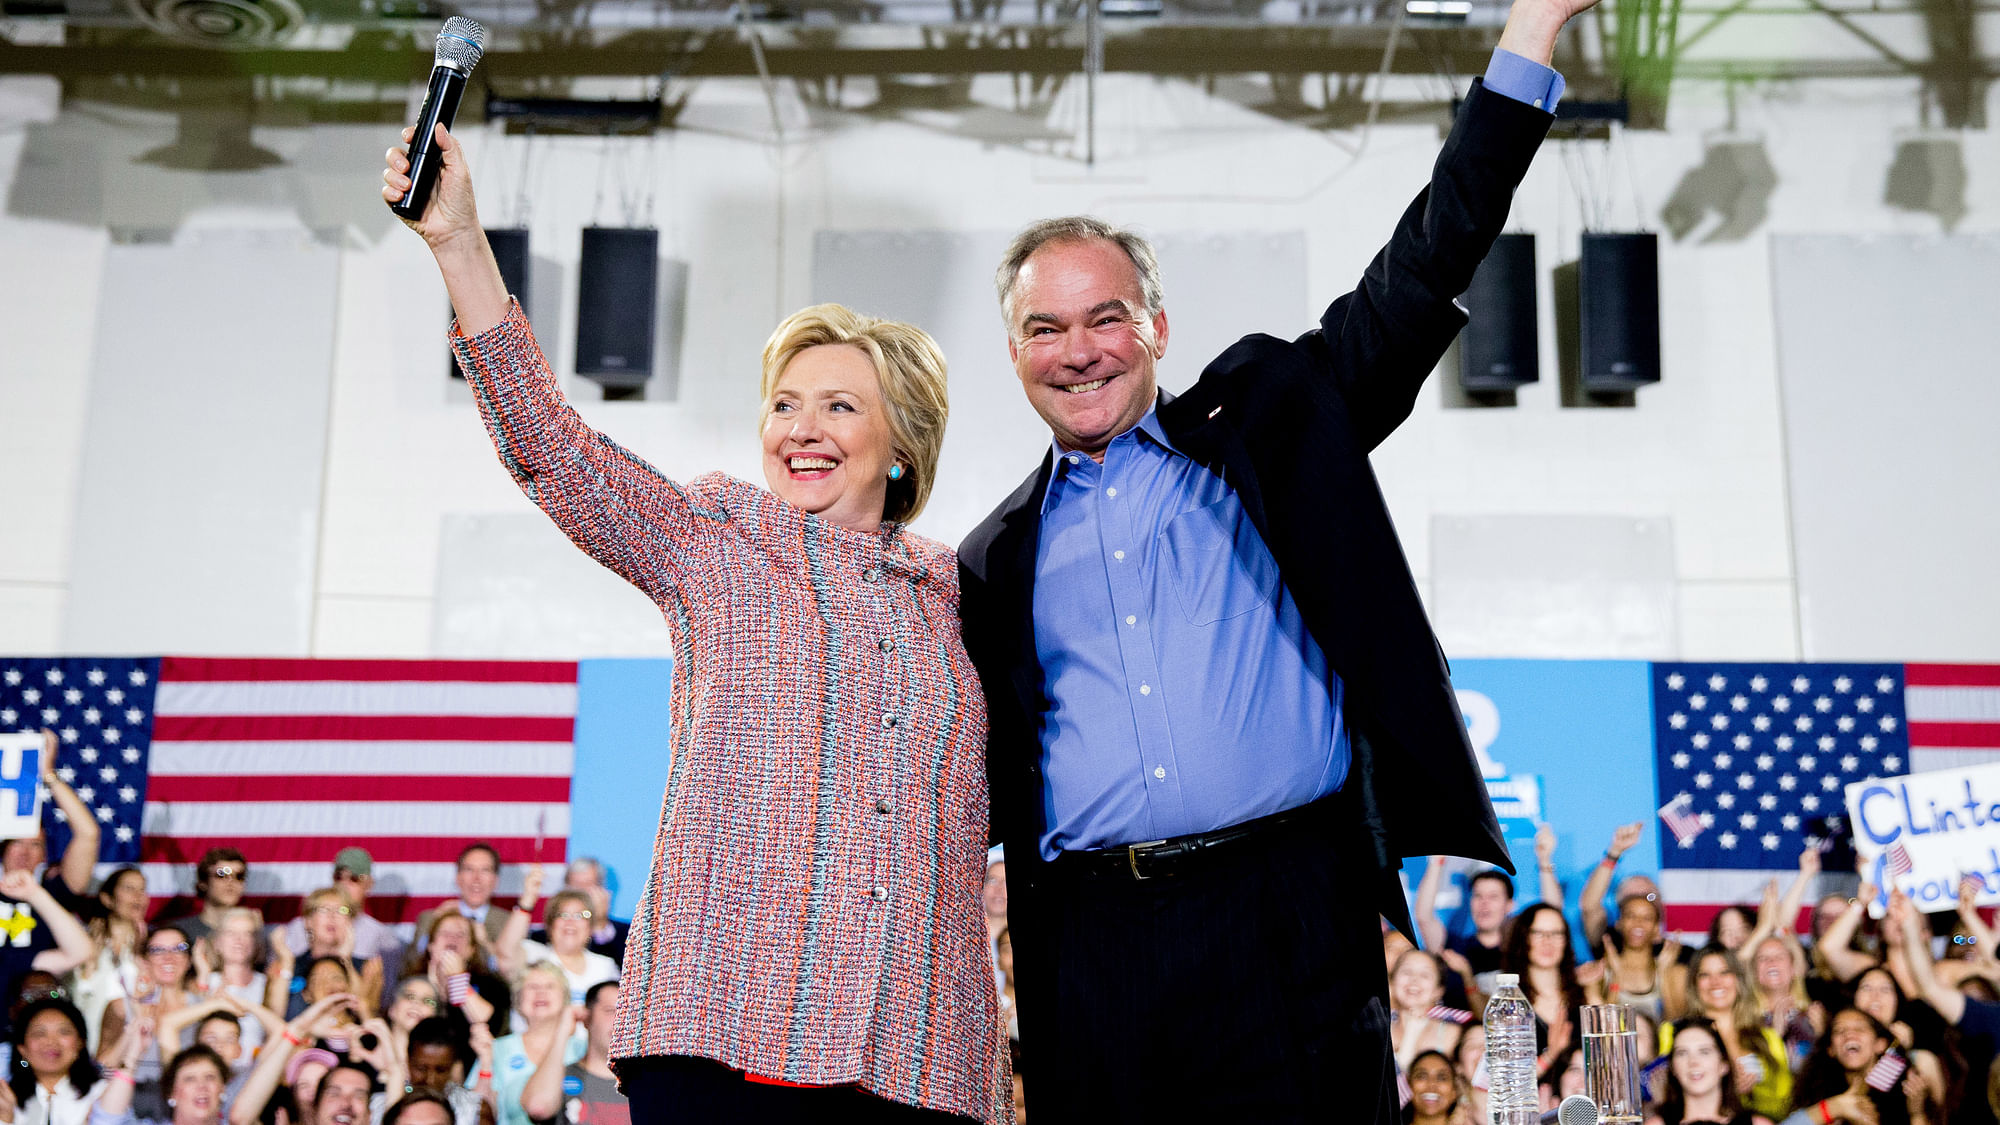 File photo of Hillary Clinton with Tim Kaine at a rally in Virginia. (Photo: AP)